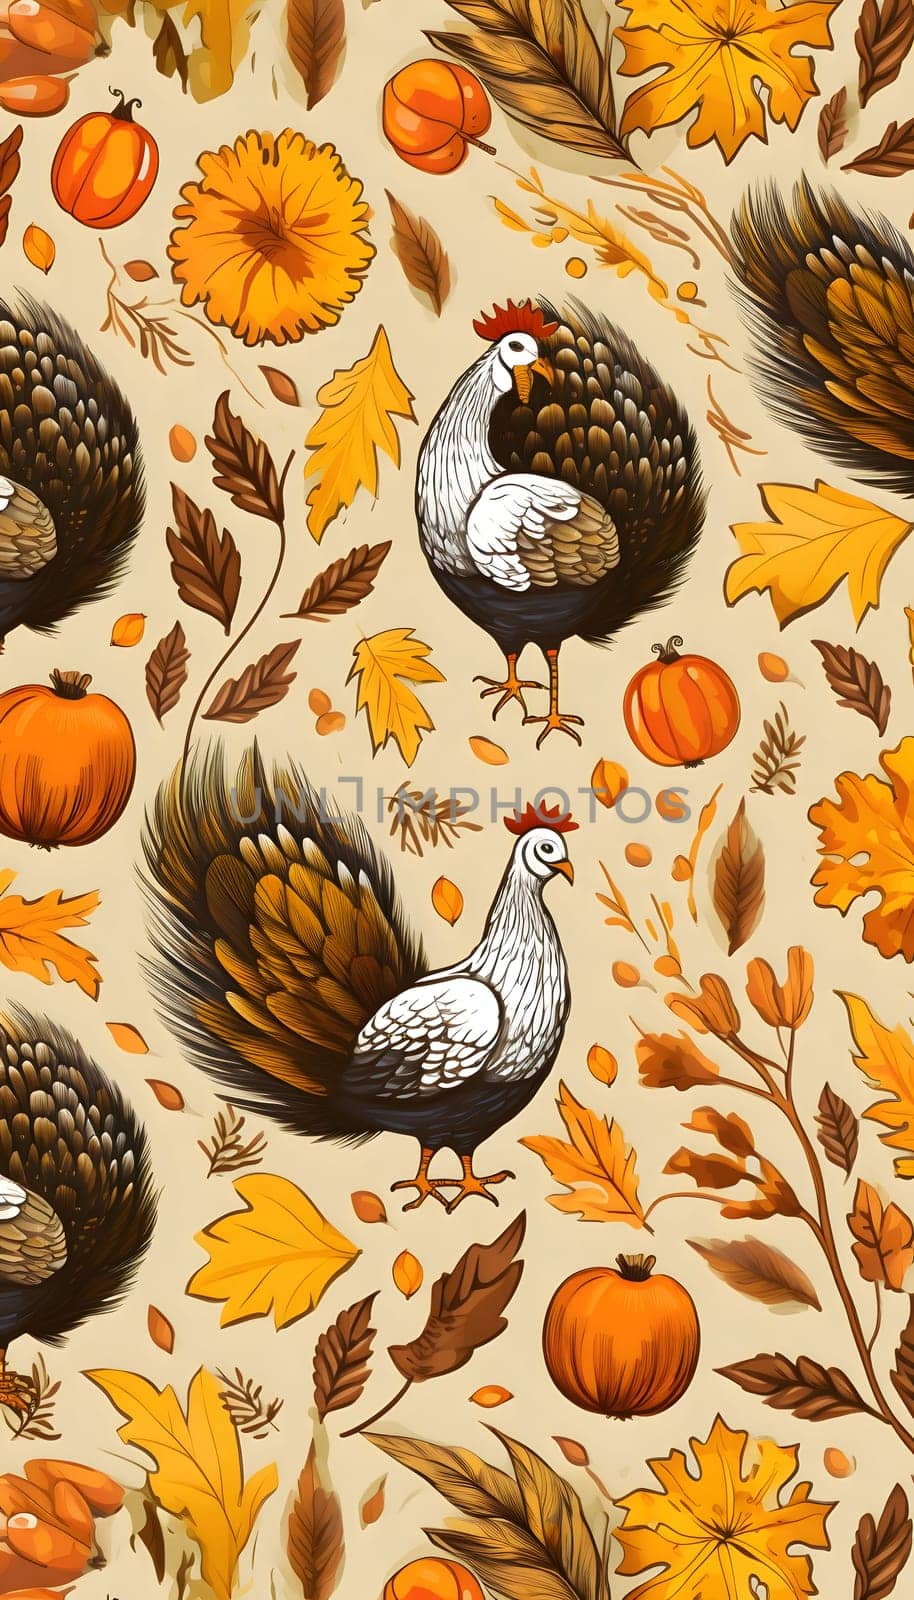 Chickens, turkeys, pumpkins, leaves as abstract background, wallpaper, banner, texture design with pattern - vector. Light colors. by ThemesS